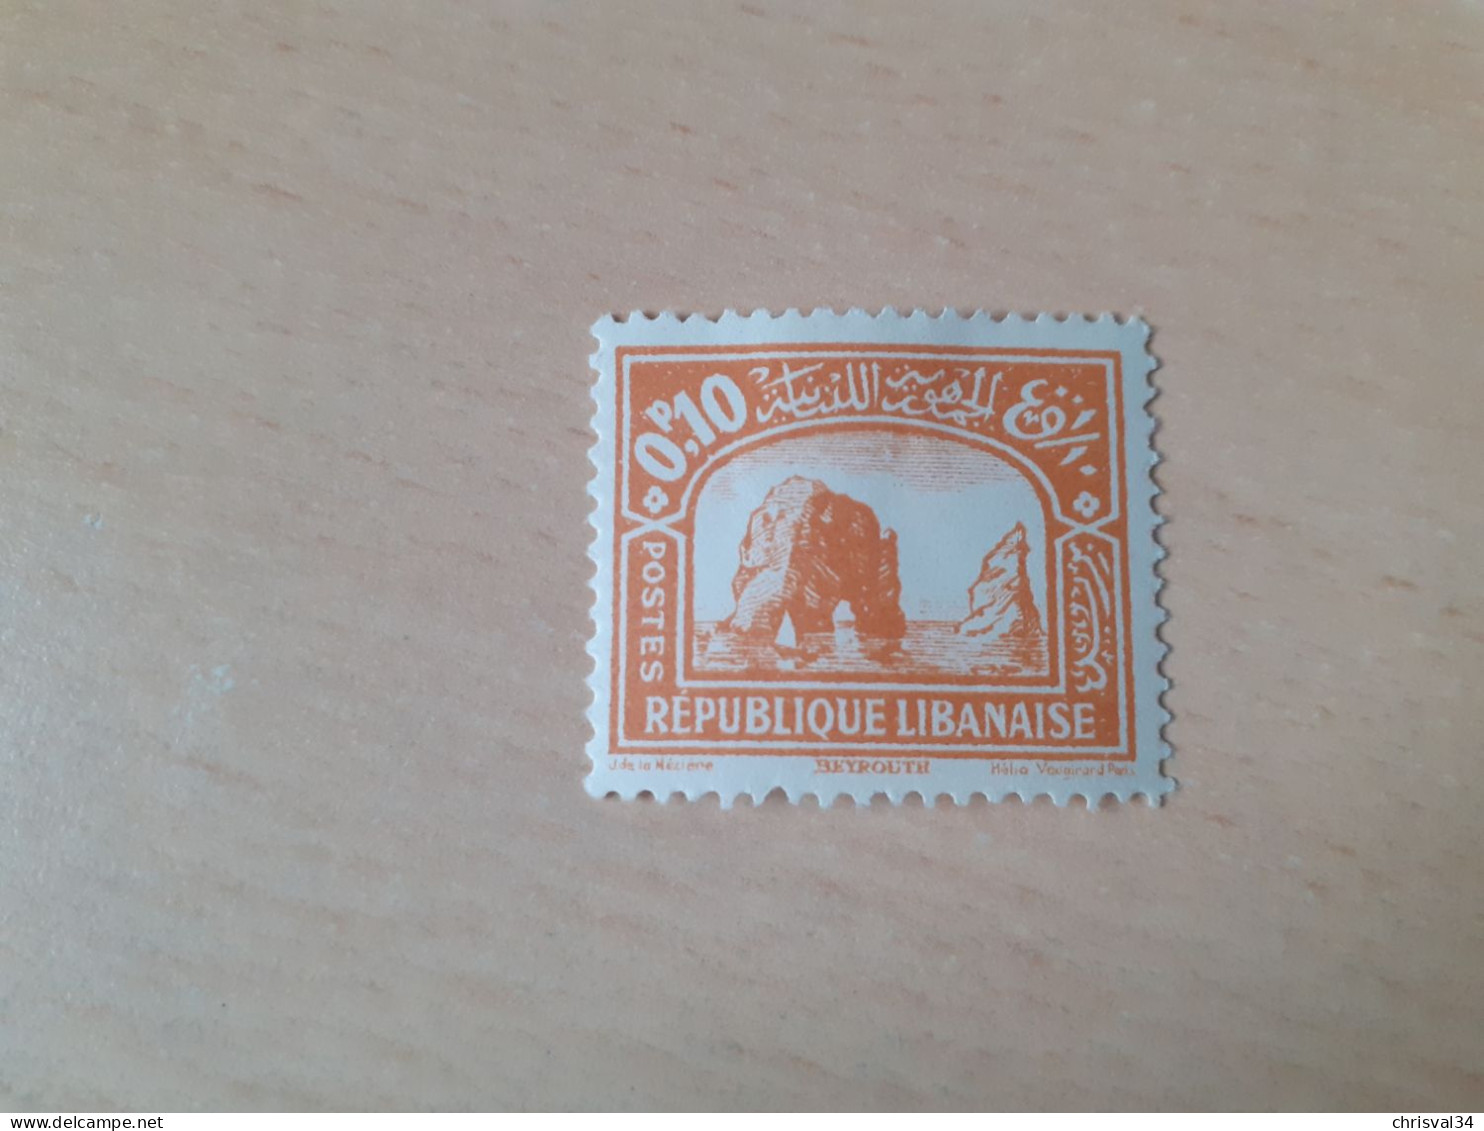 TIMBRE   GRAND  LIBAN       N  128       COTE  0,25  EUROS    NEUF  TRACE  CHARNIERE - Unused Stamps